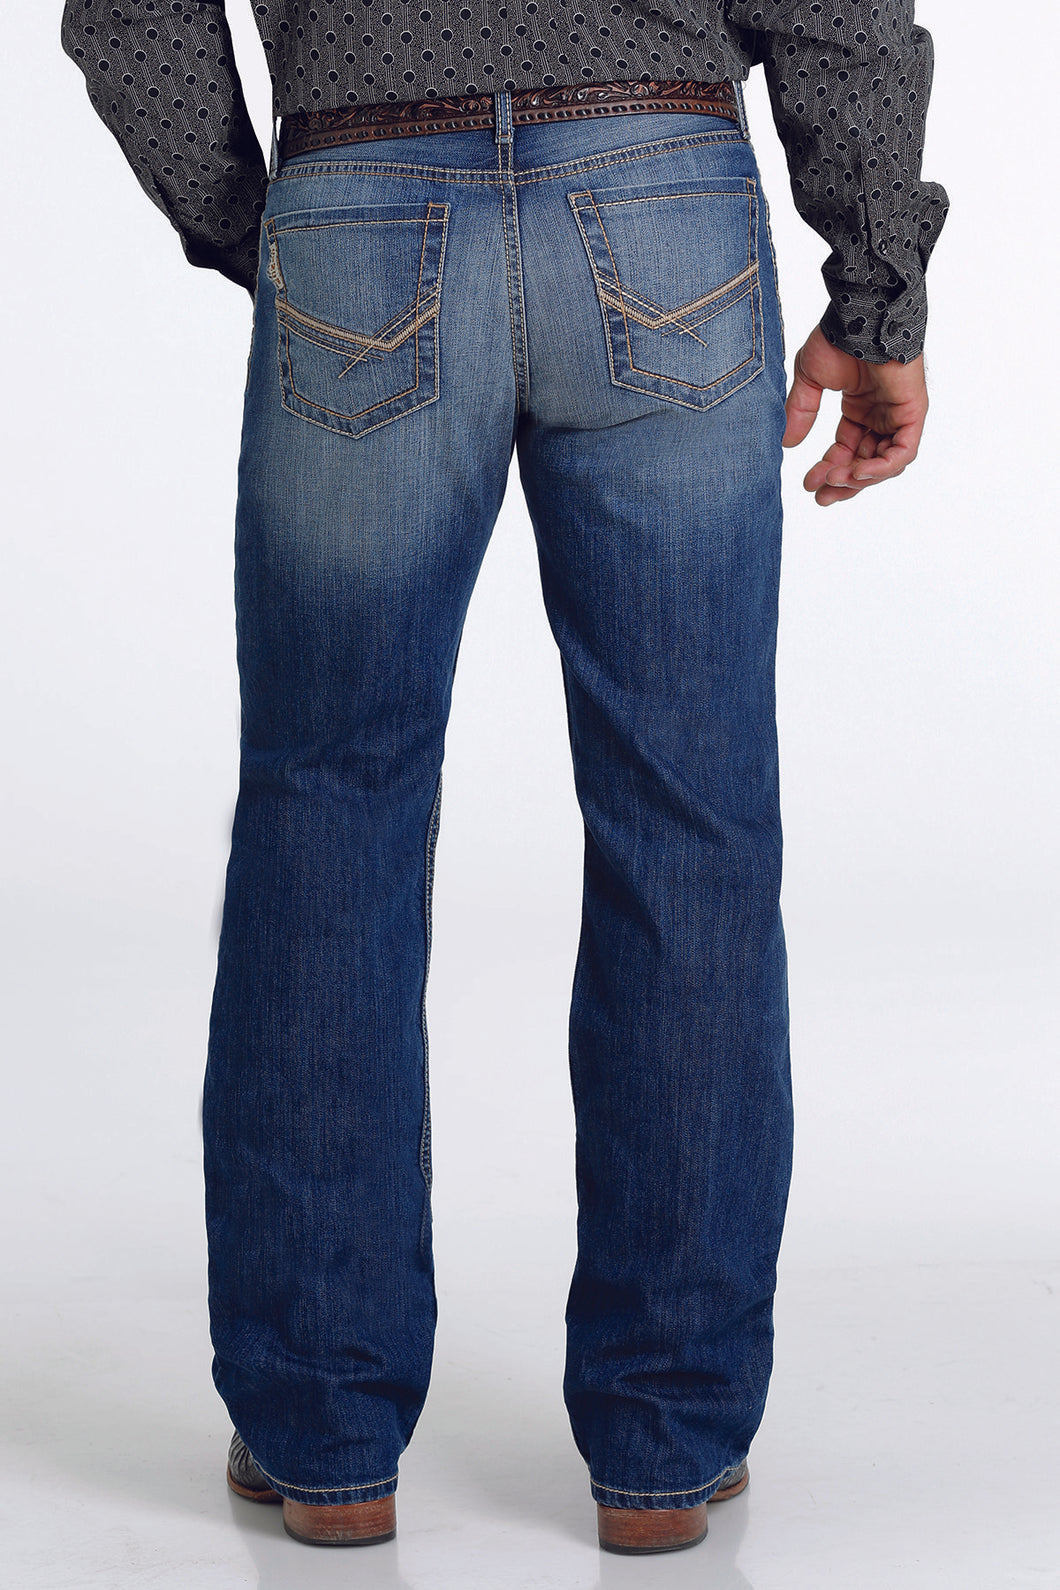 Cinch Grant Jeans mid rise,relaxed,bootcut